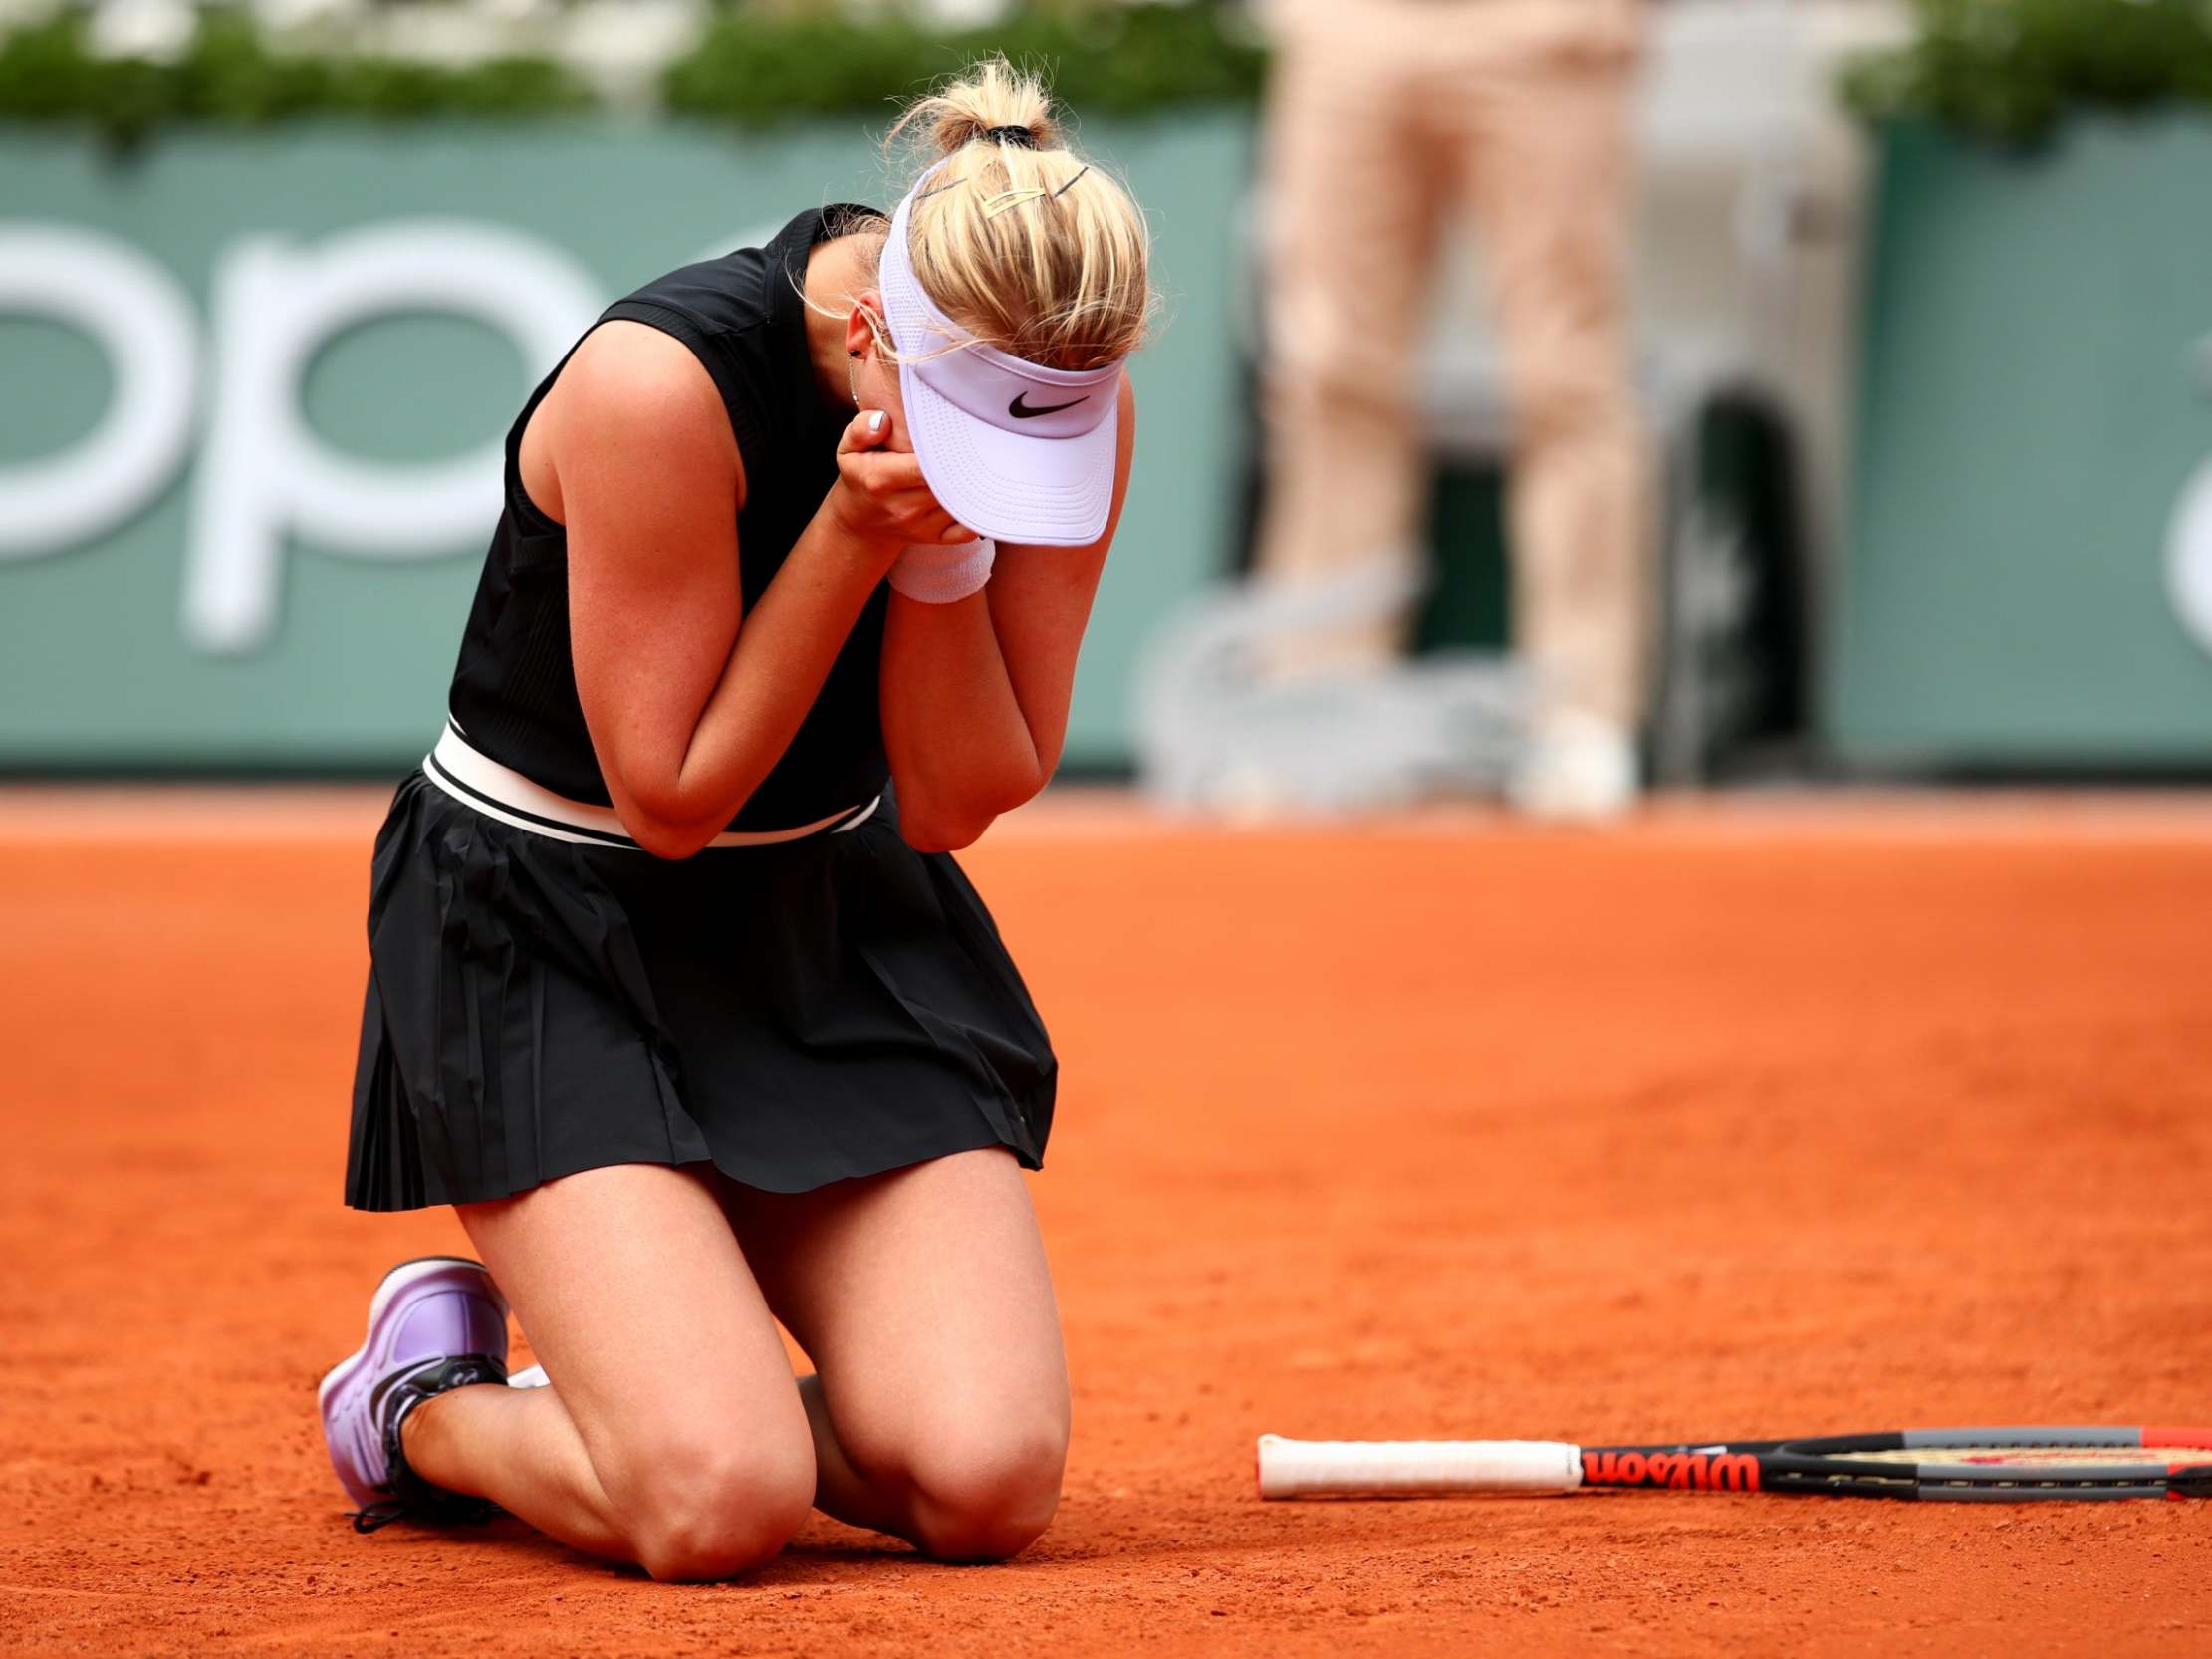 Potapova celebrates her first round victory over Kerber at the French Open